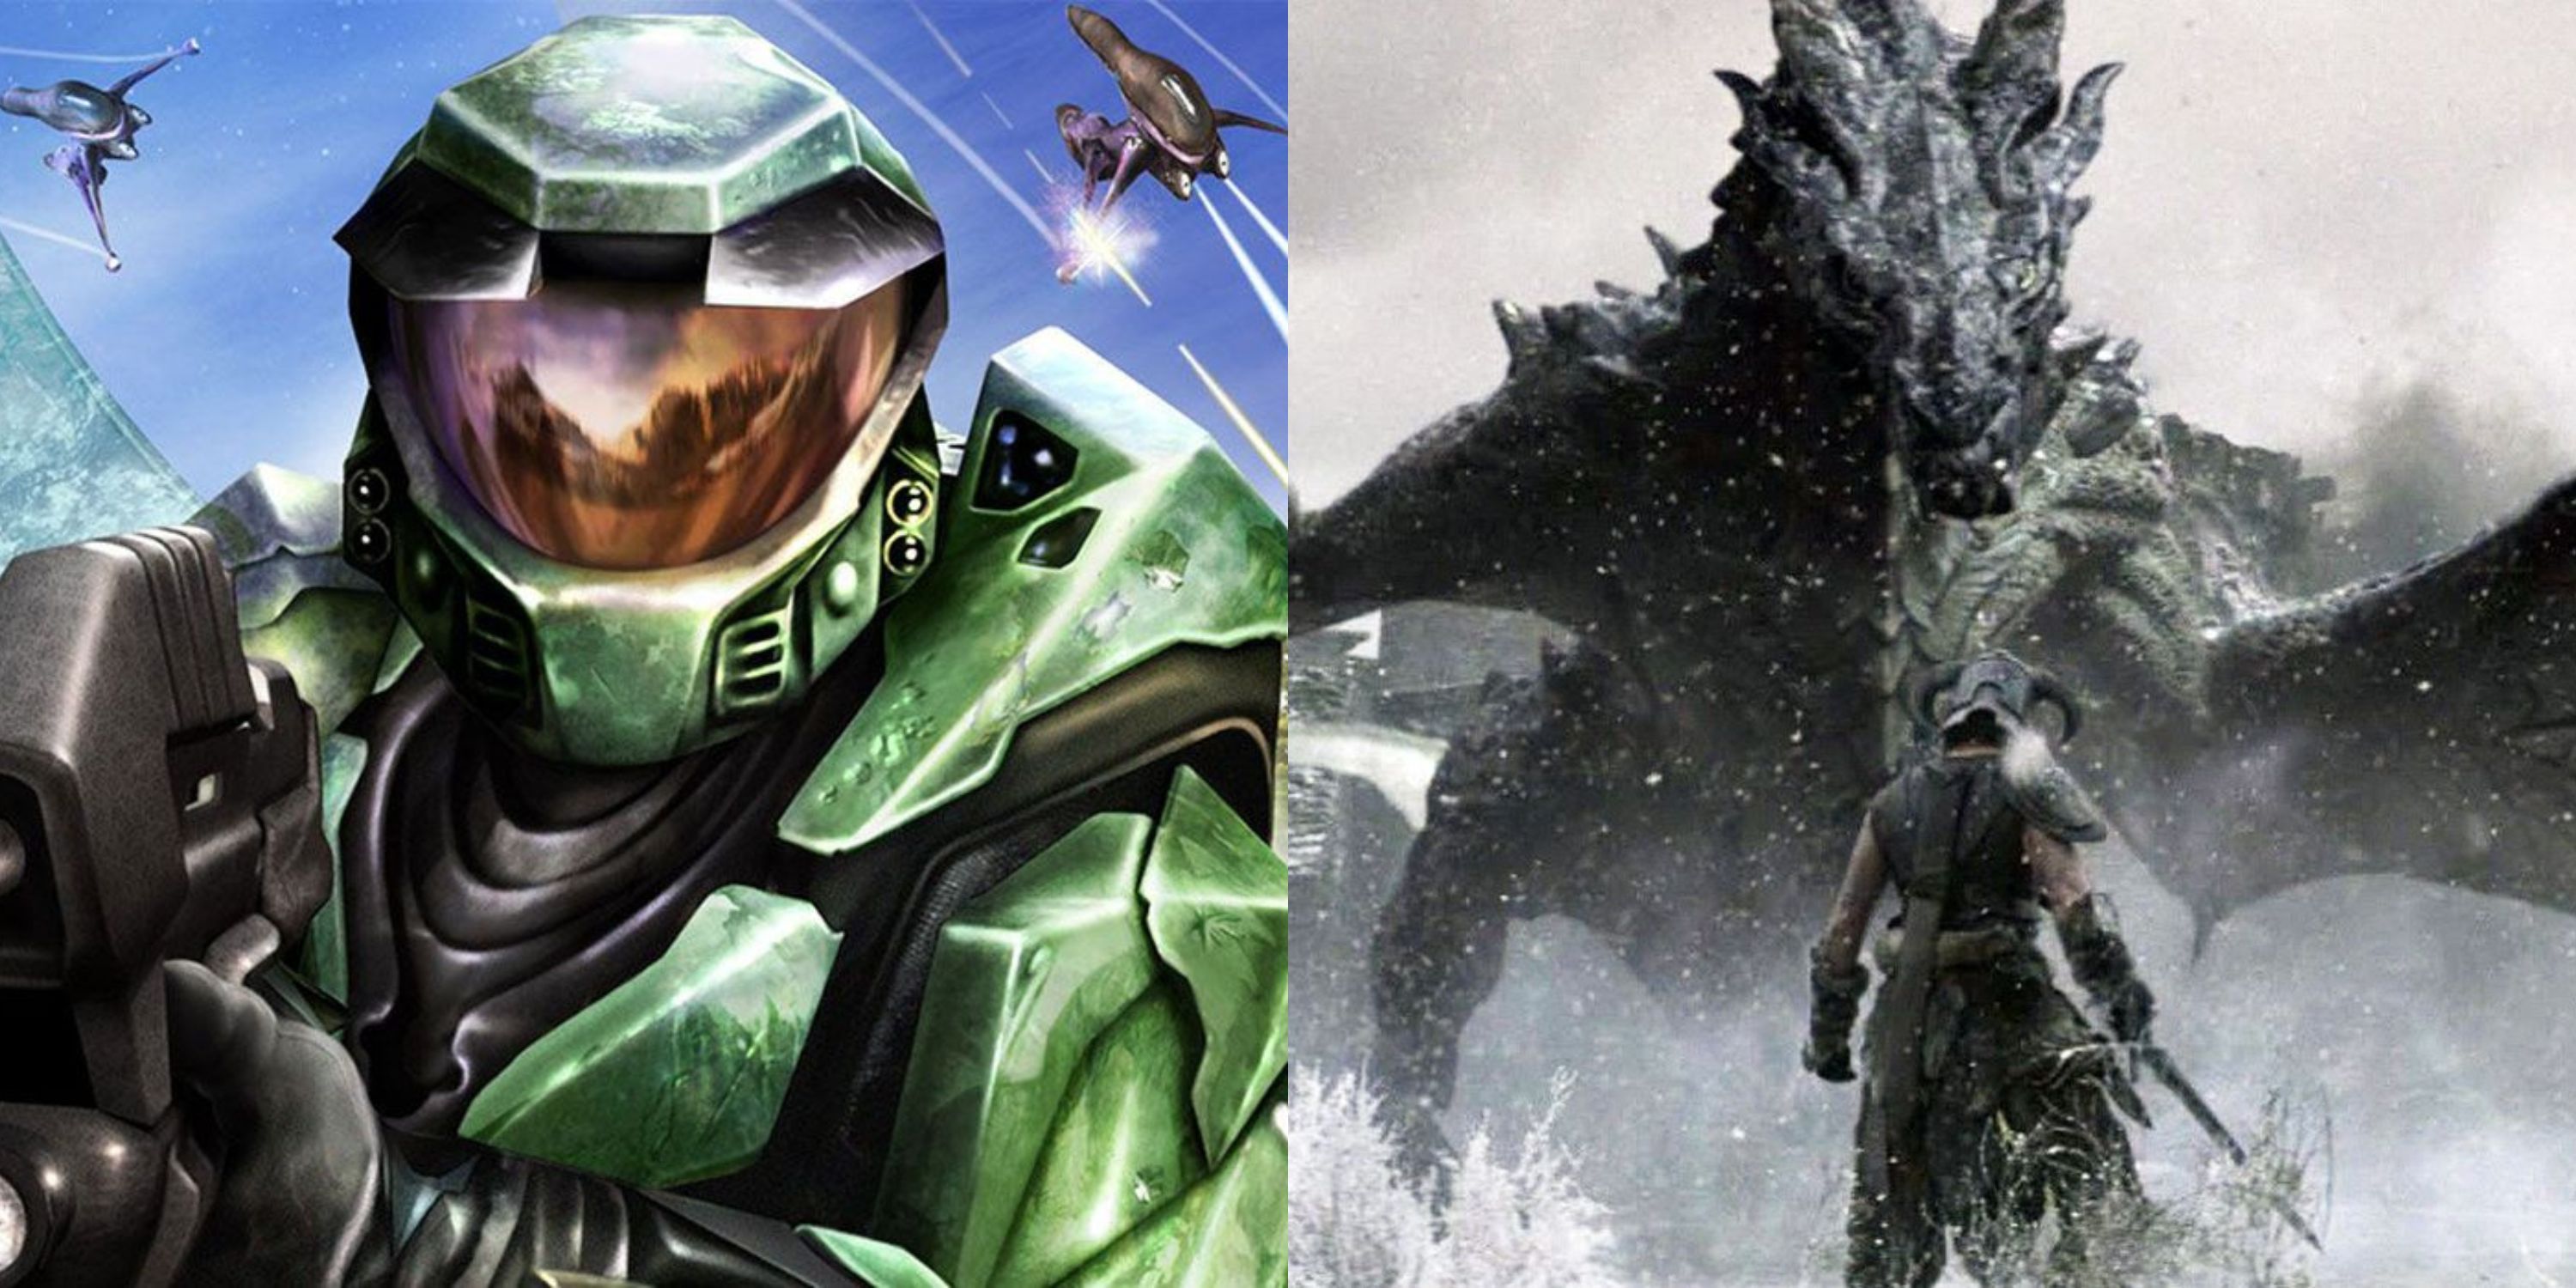 Featured image Master Chief on the Halo Combat Evolved cover and the Dragonborn facing a dragon in Skyrim